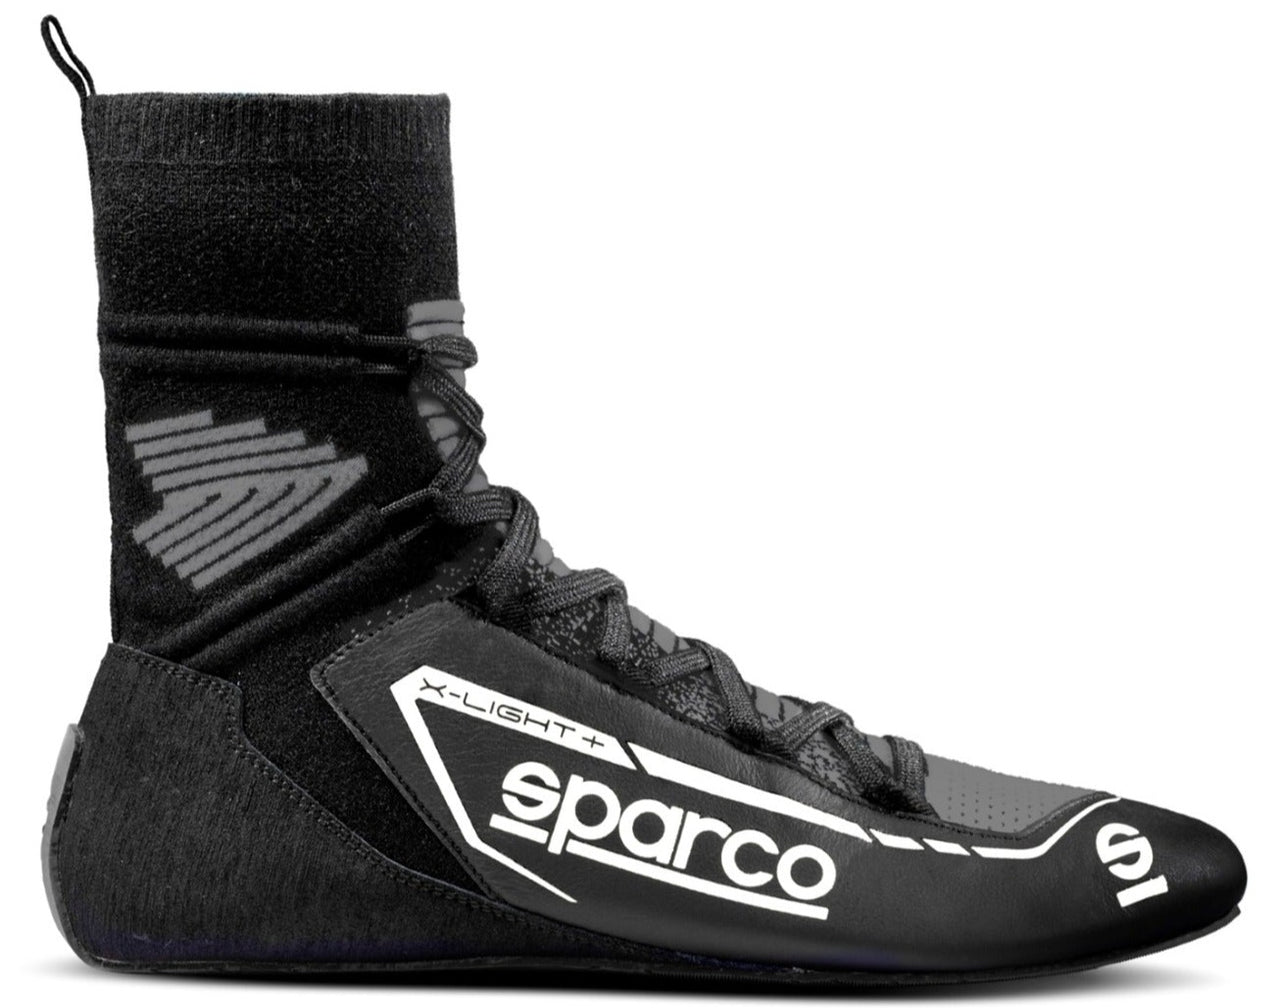 Sparco X-Light+ Racing Shoes Black / White Image